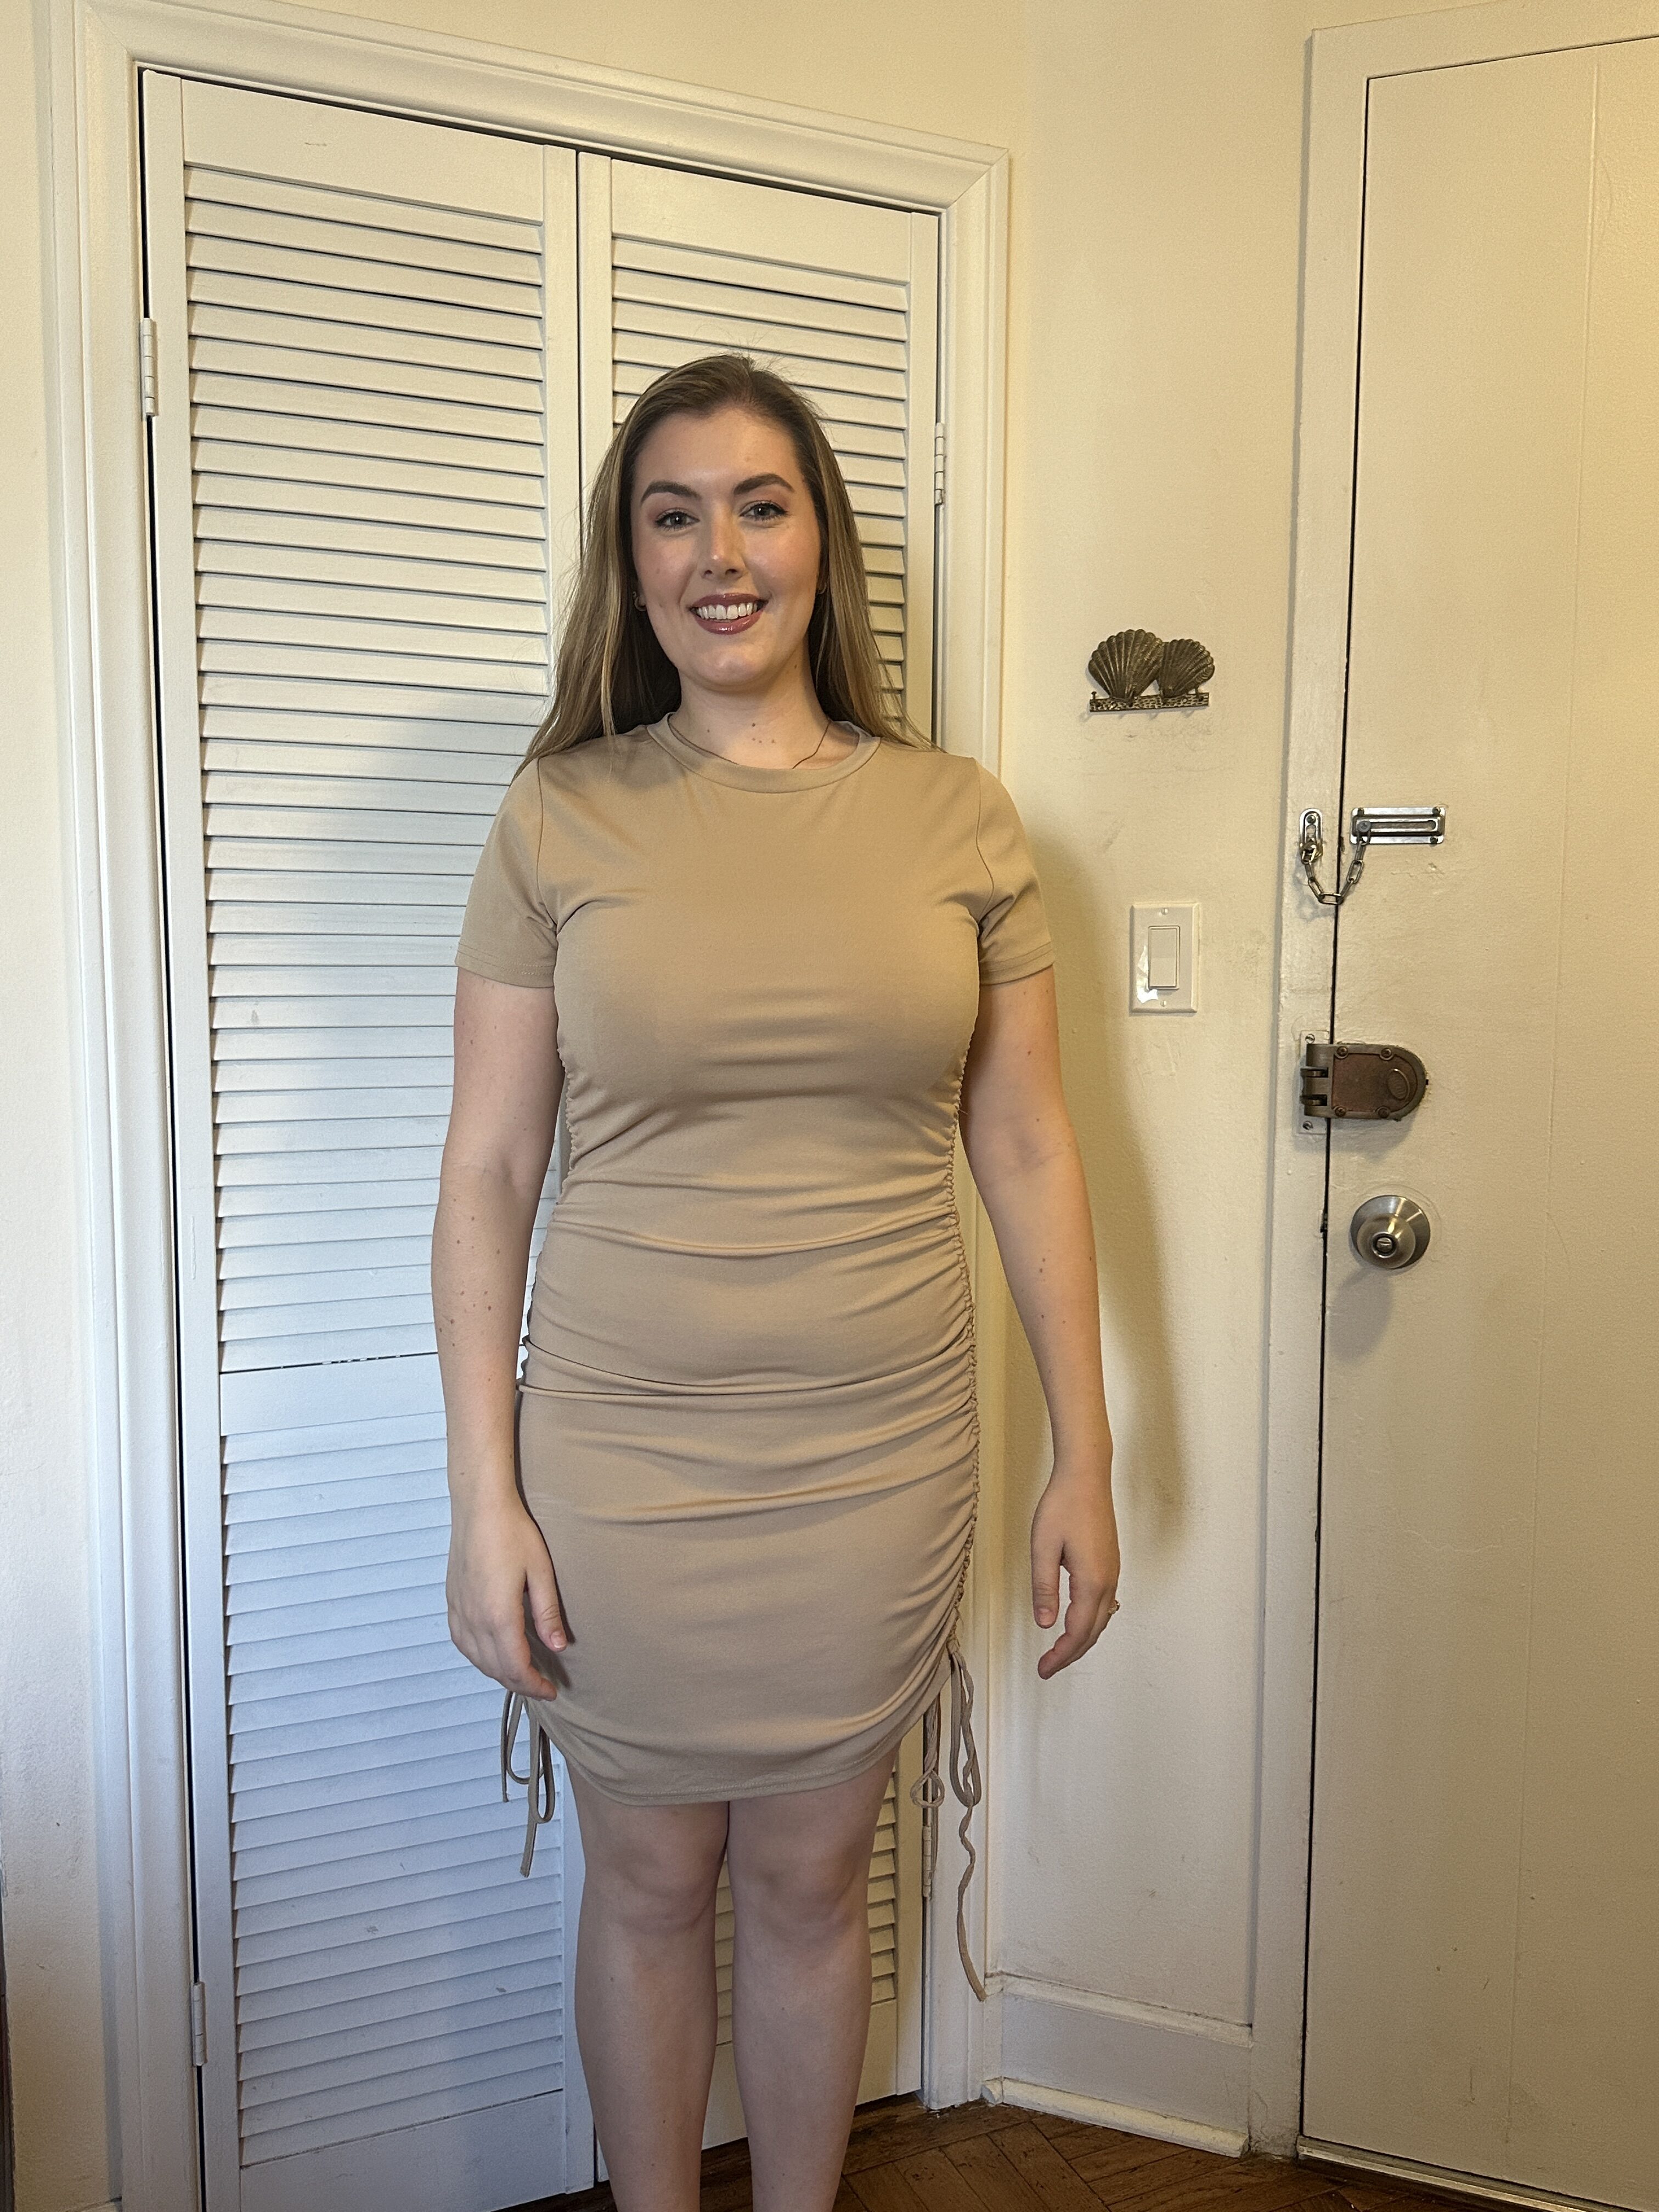 SPANX vs. SKIMS vs. Underoutfit – Which Shapewear Smooths Out My